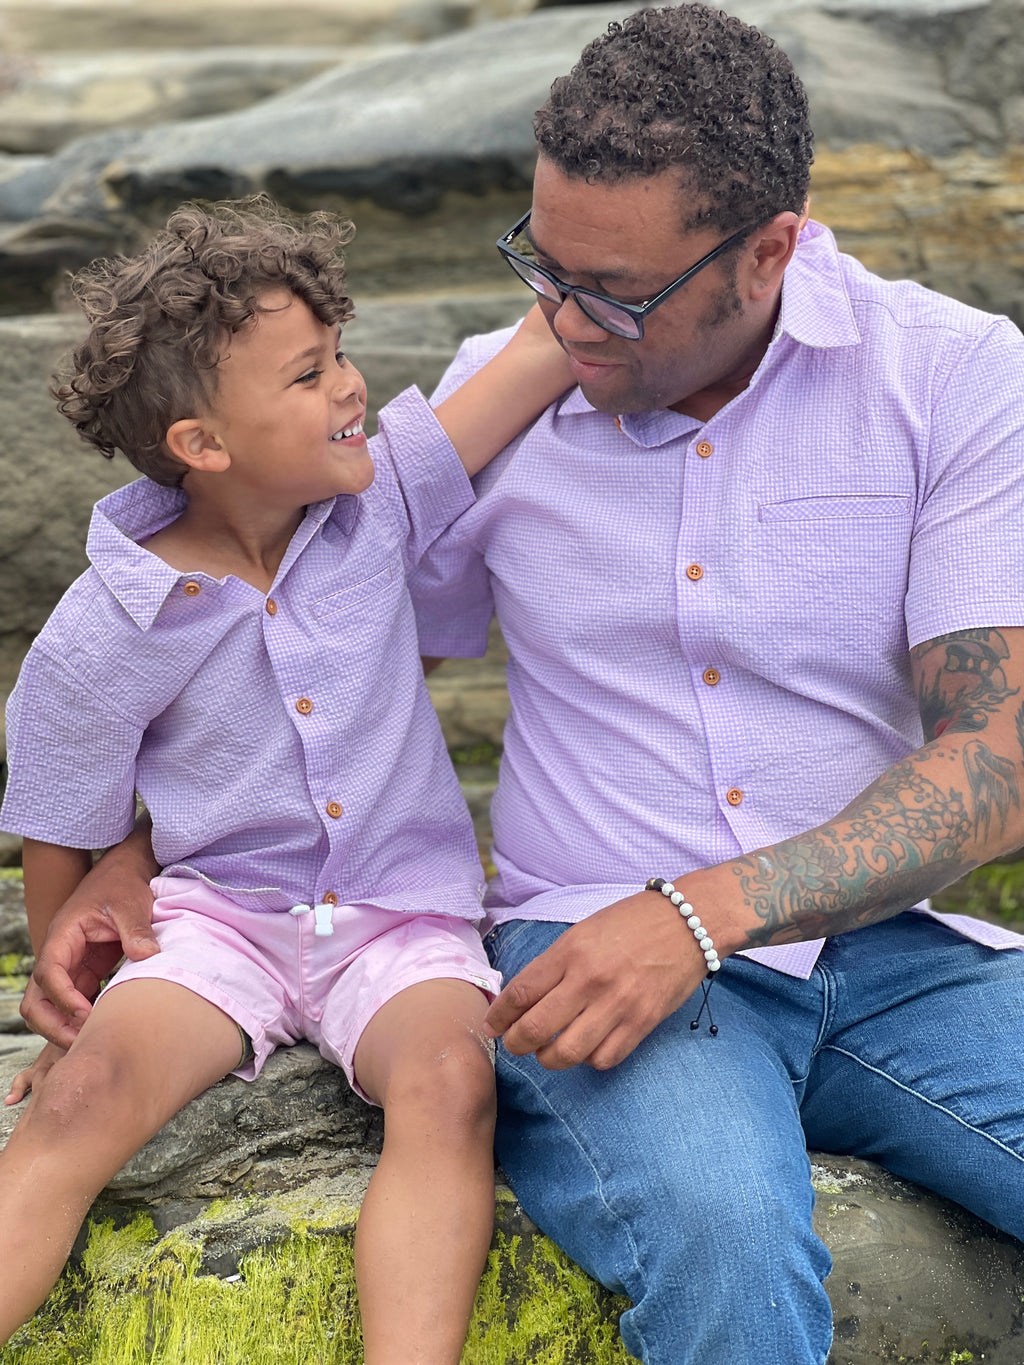 A boy with brown curly hair wearing our pink/lilac seersucker woven shirt and pink twill shorts, sitting on a big rock with his dad who has curly brown hair and is wearing the matching shirt in dad sizes. 